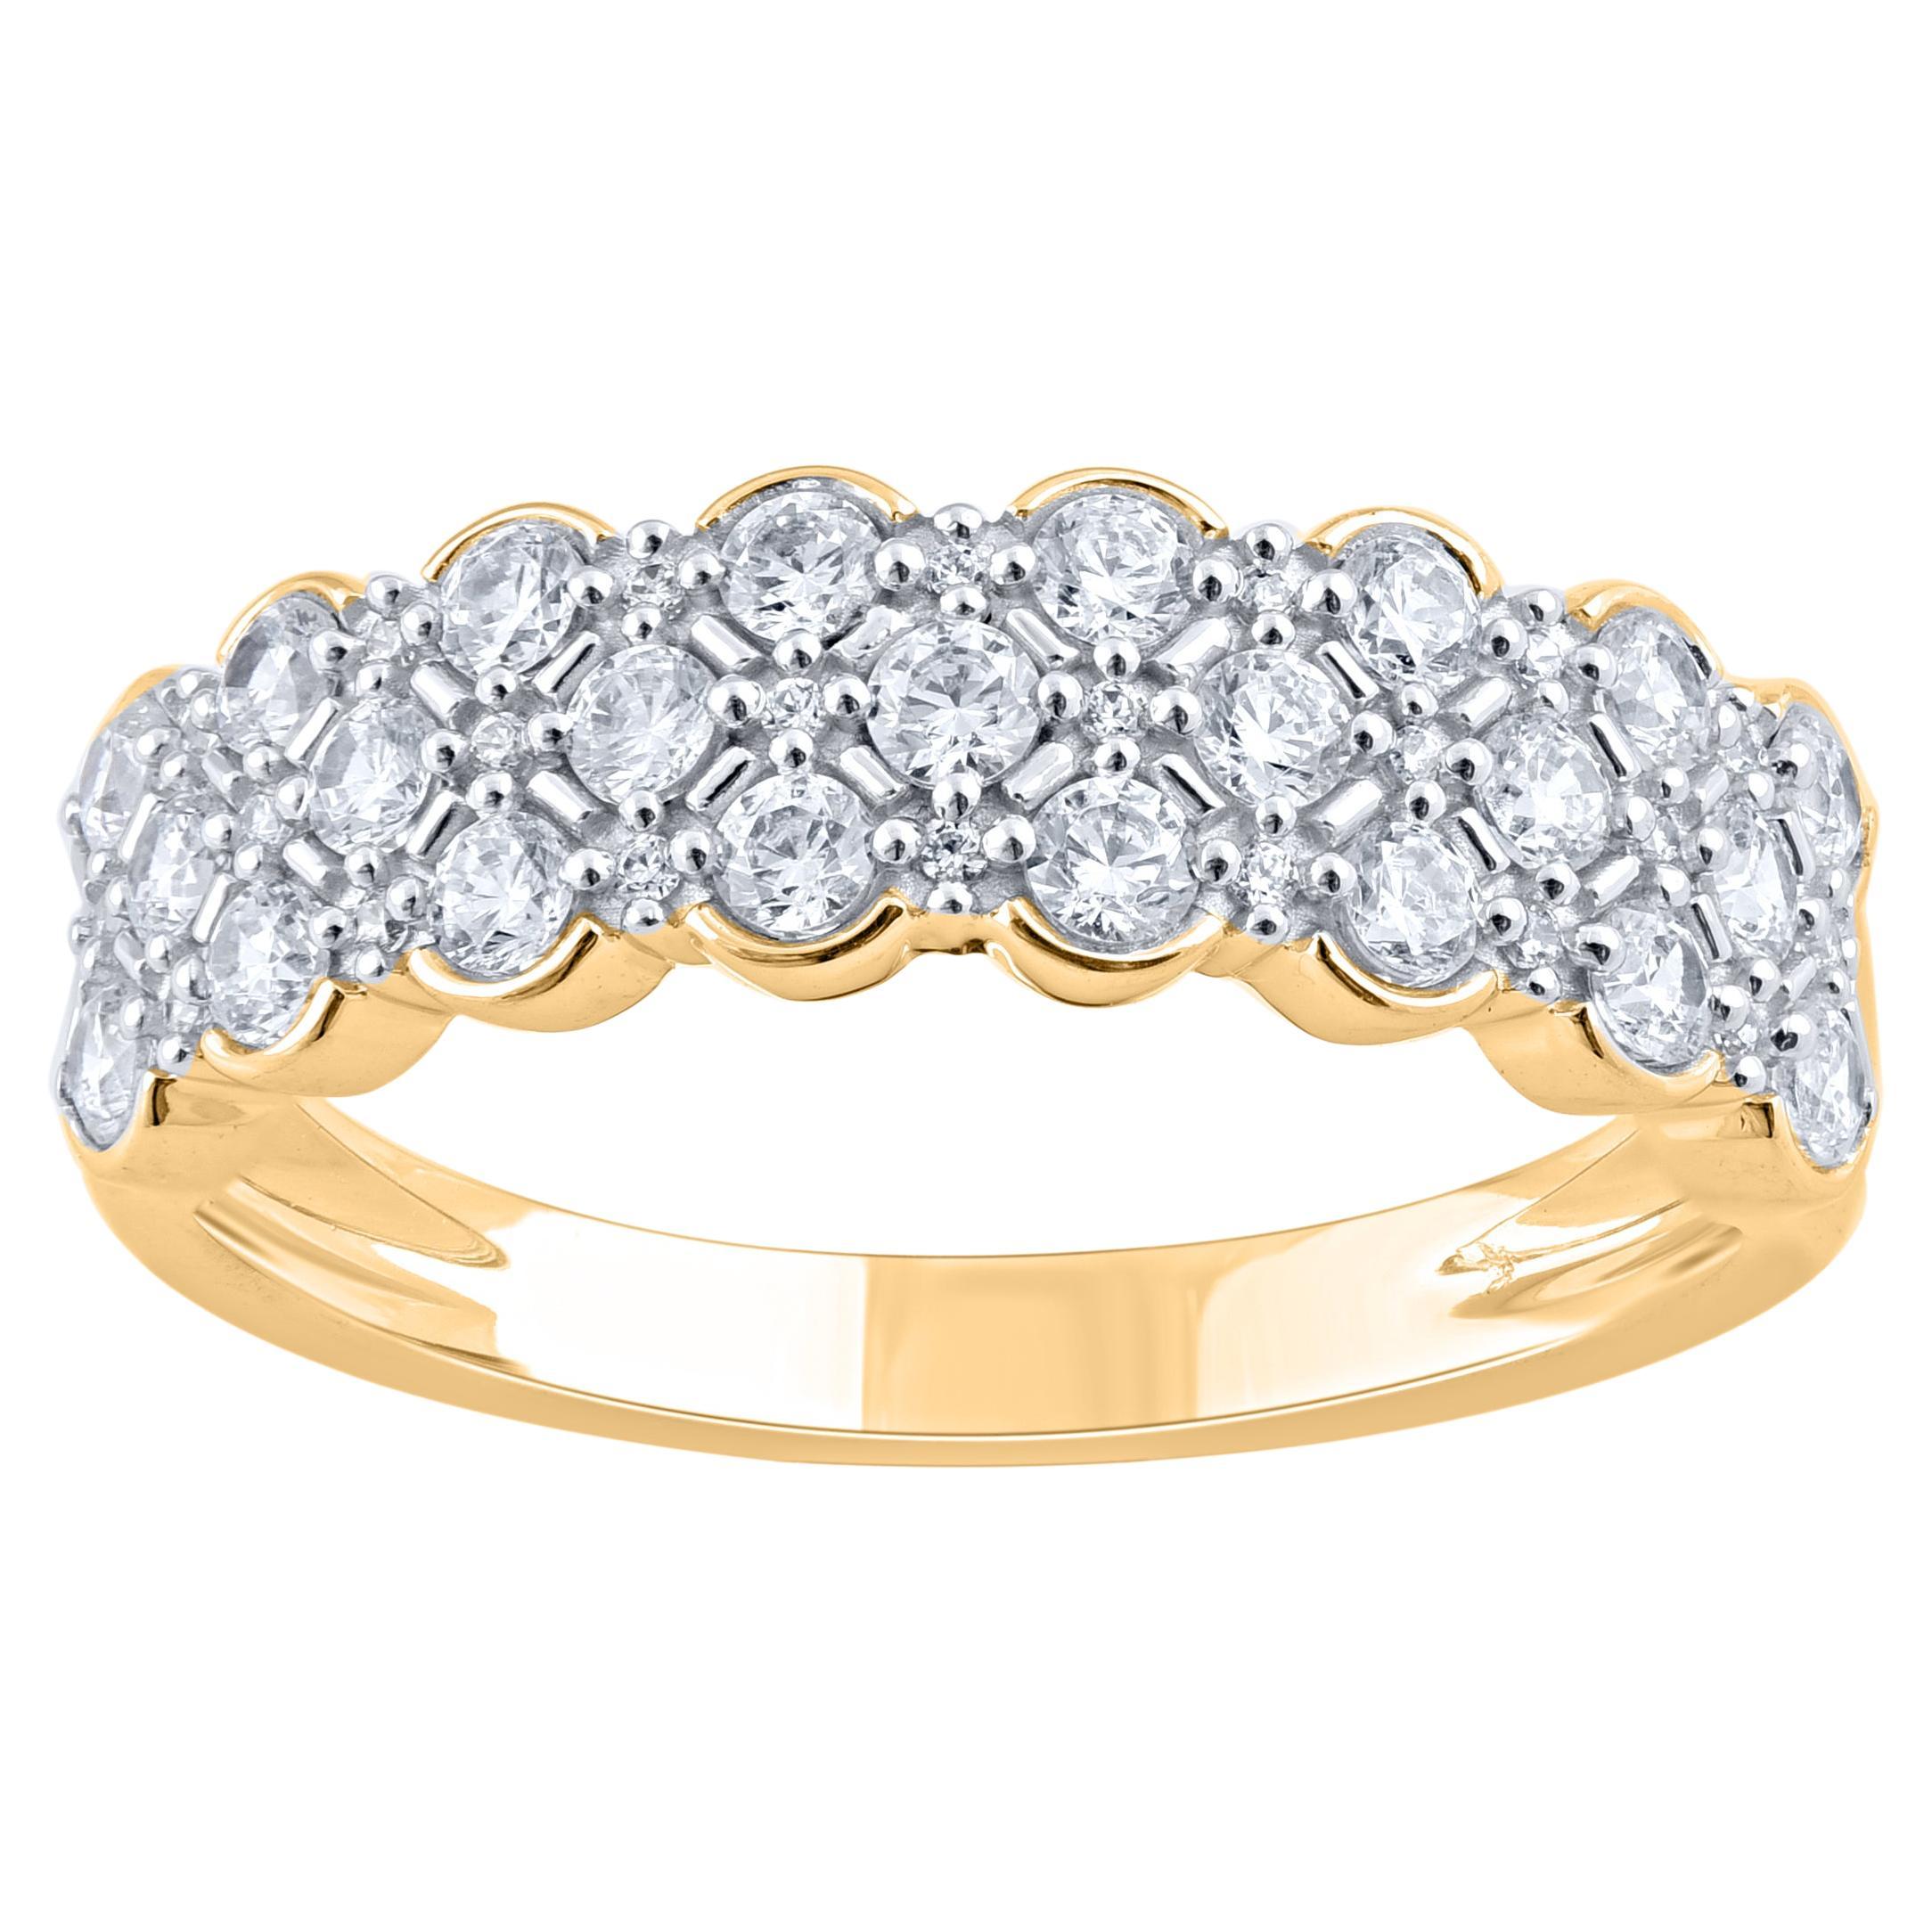 TJD 0.50 Carat Natural Diamond Anniversary Band Ring in 14 Karat Yellow Gold For Sale